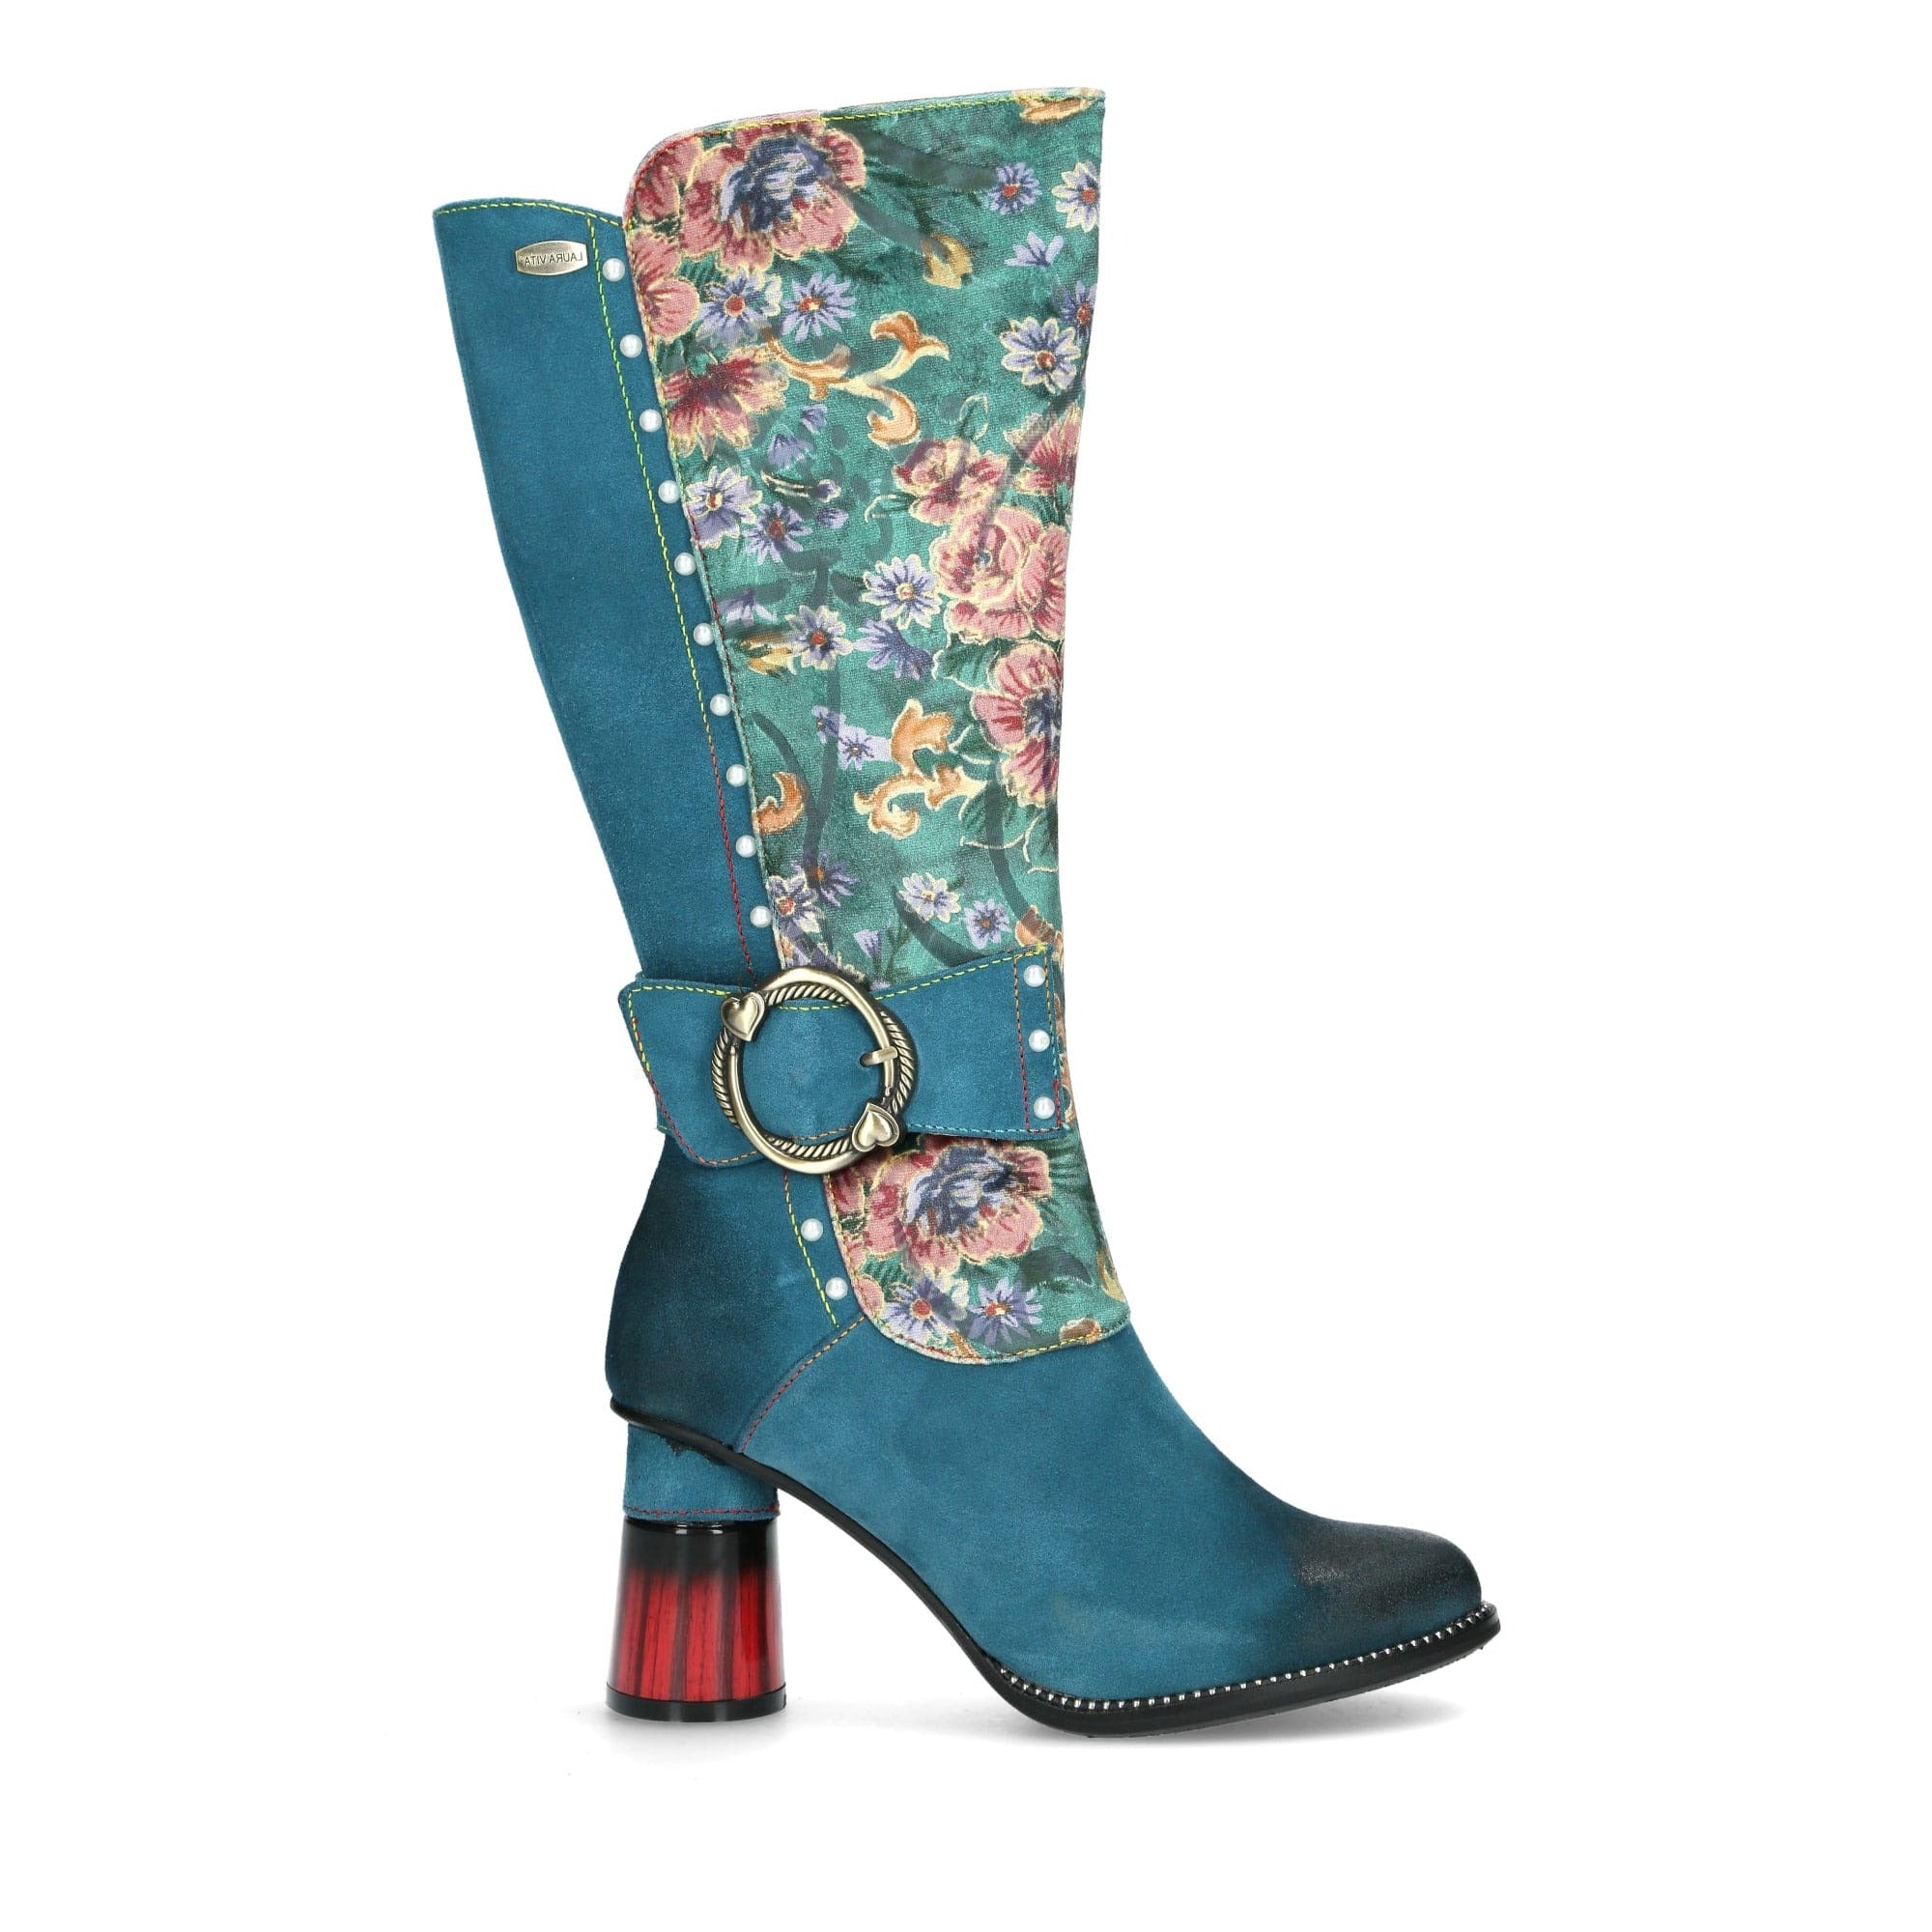 Chaussure GUCSTOO 12 - 35 / Turquoise - Botte